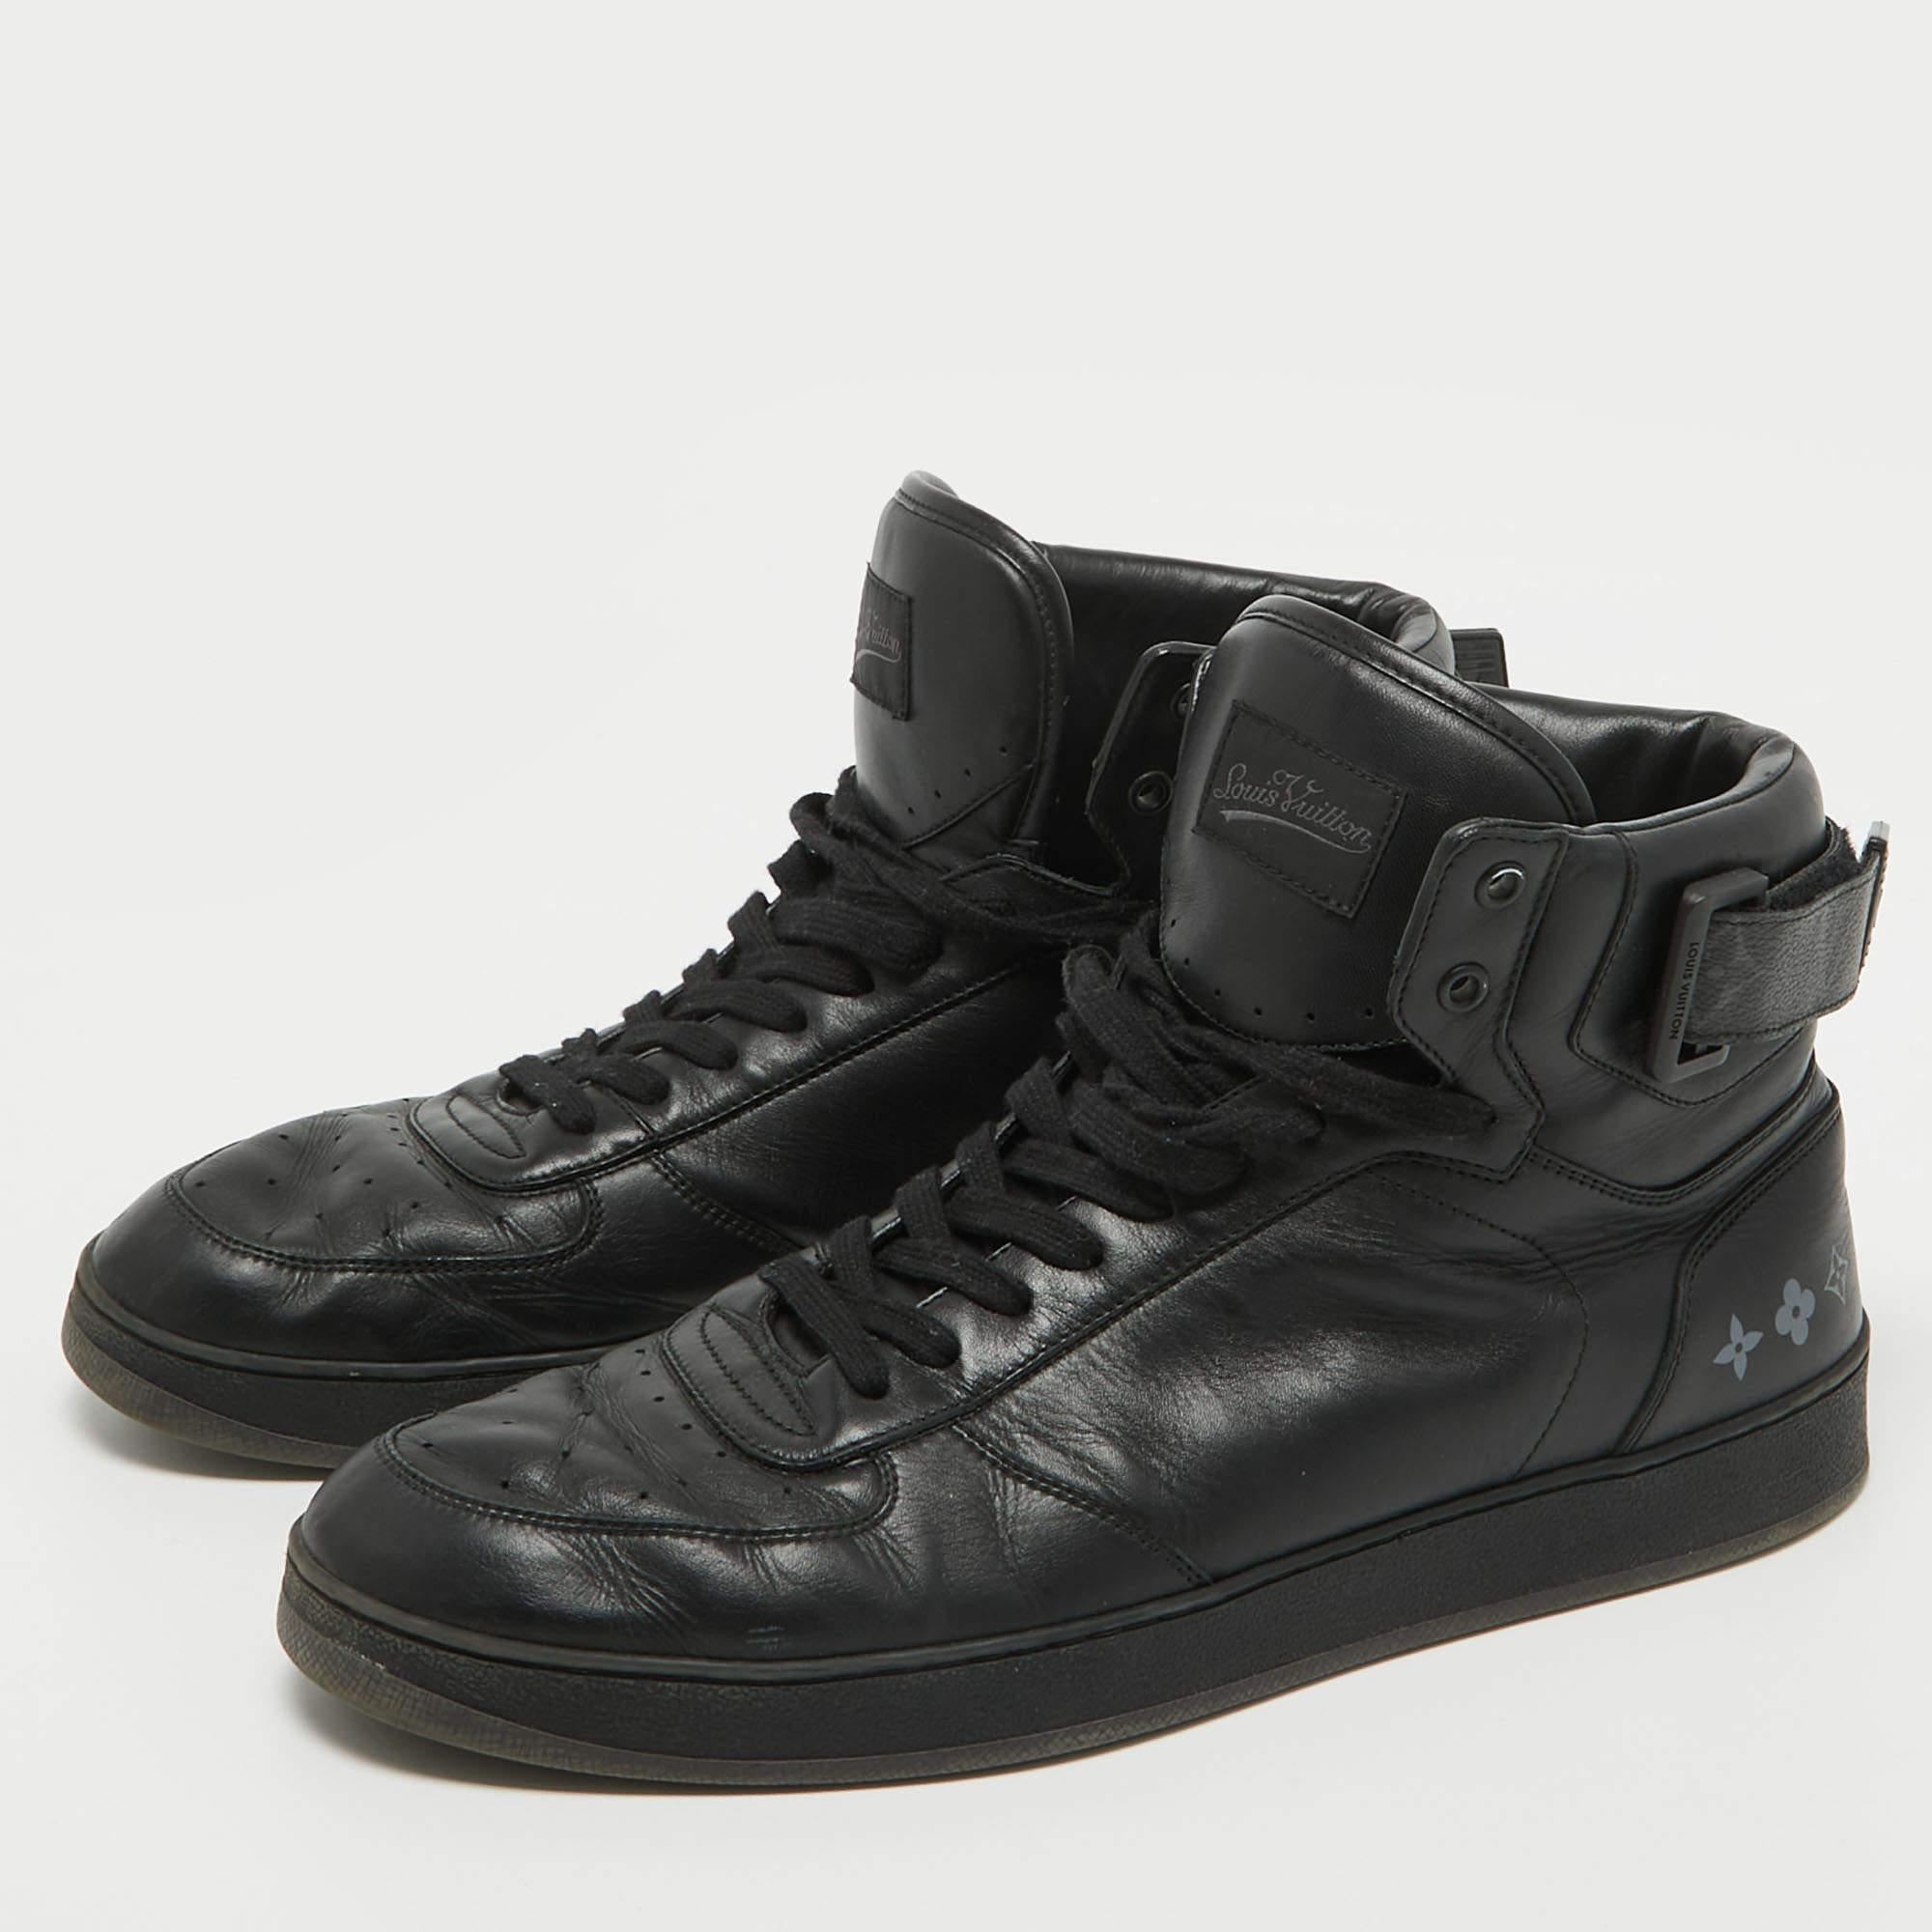 Louis Vuitton Black Leather Rivoli High Top Sneakers Size 43 For Sale 2